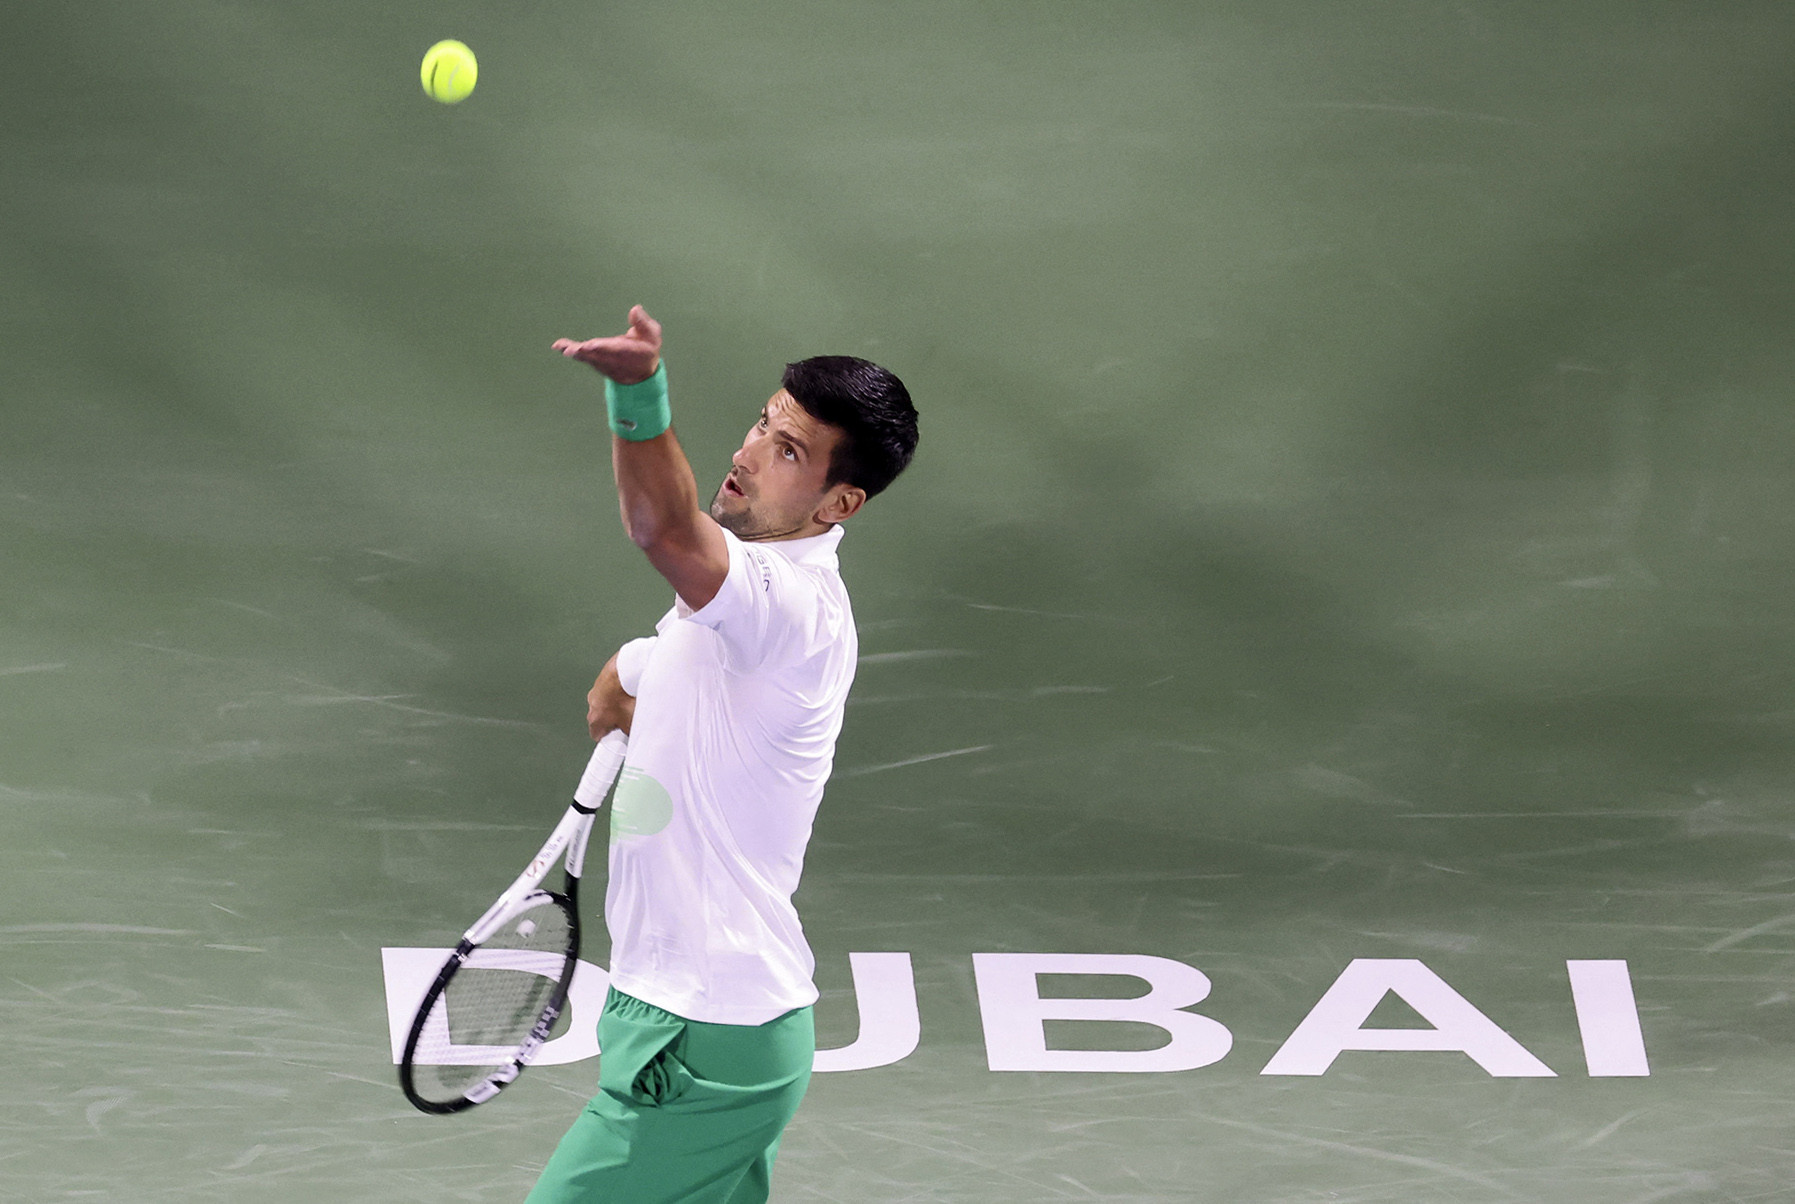 Novak Djokovic played his first match since being deported from Australia ©Getty Images